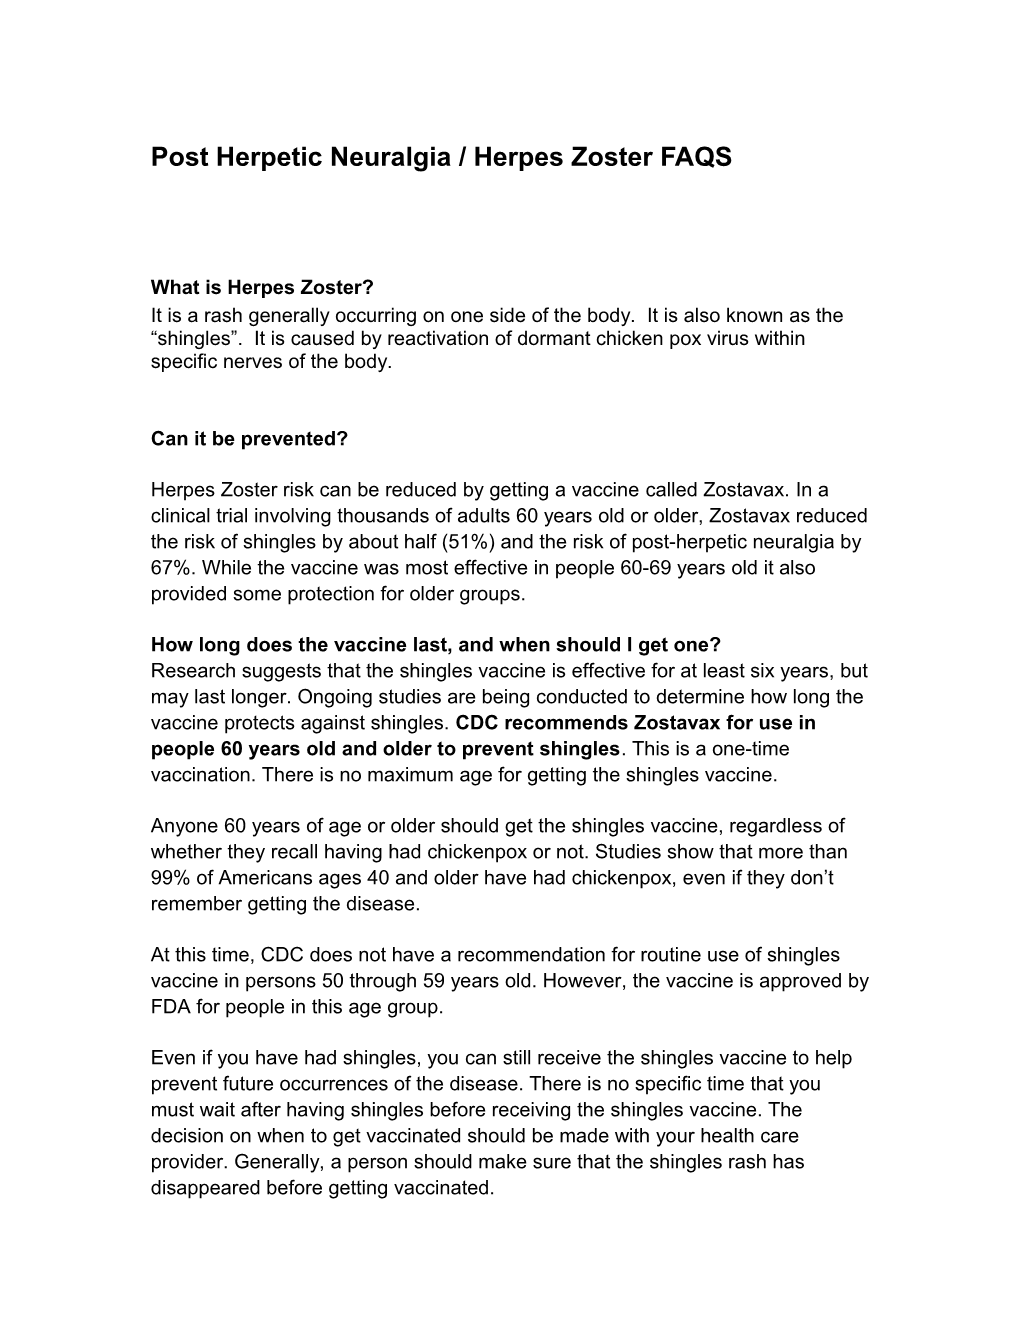 Post Herpetic Neuralgia/Herpes Zoster FAQS